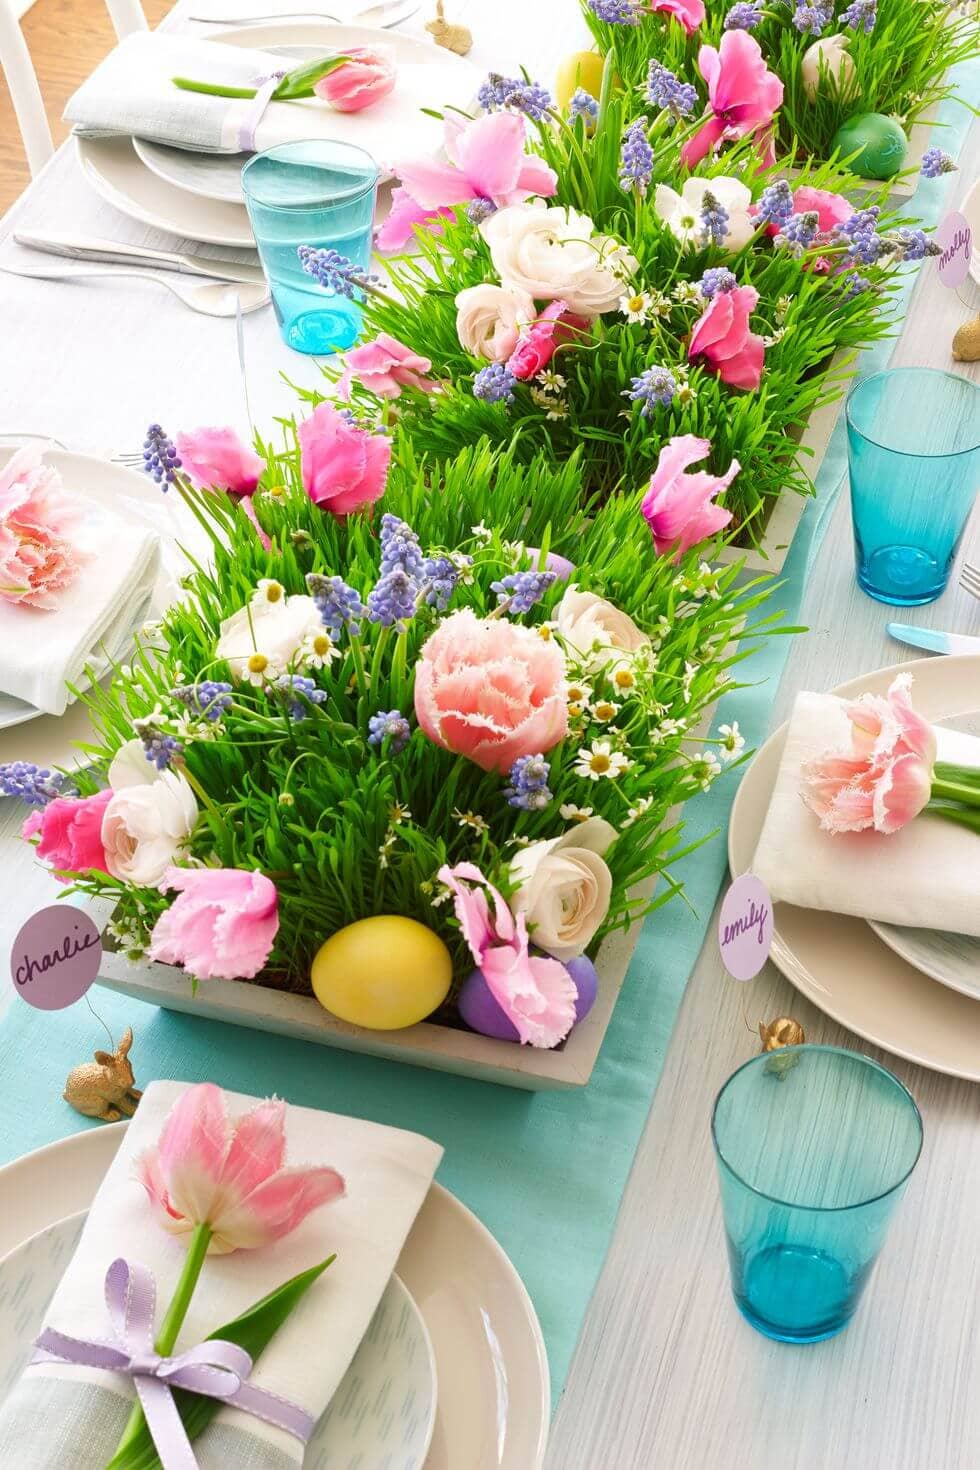 27 Adorable Easter Decorations to Add Splashes of Joy to Your Home